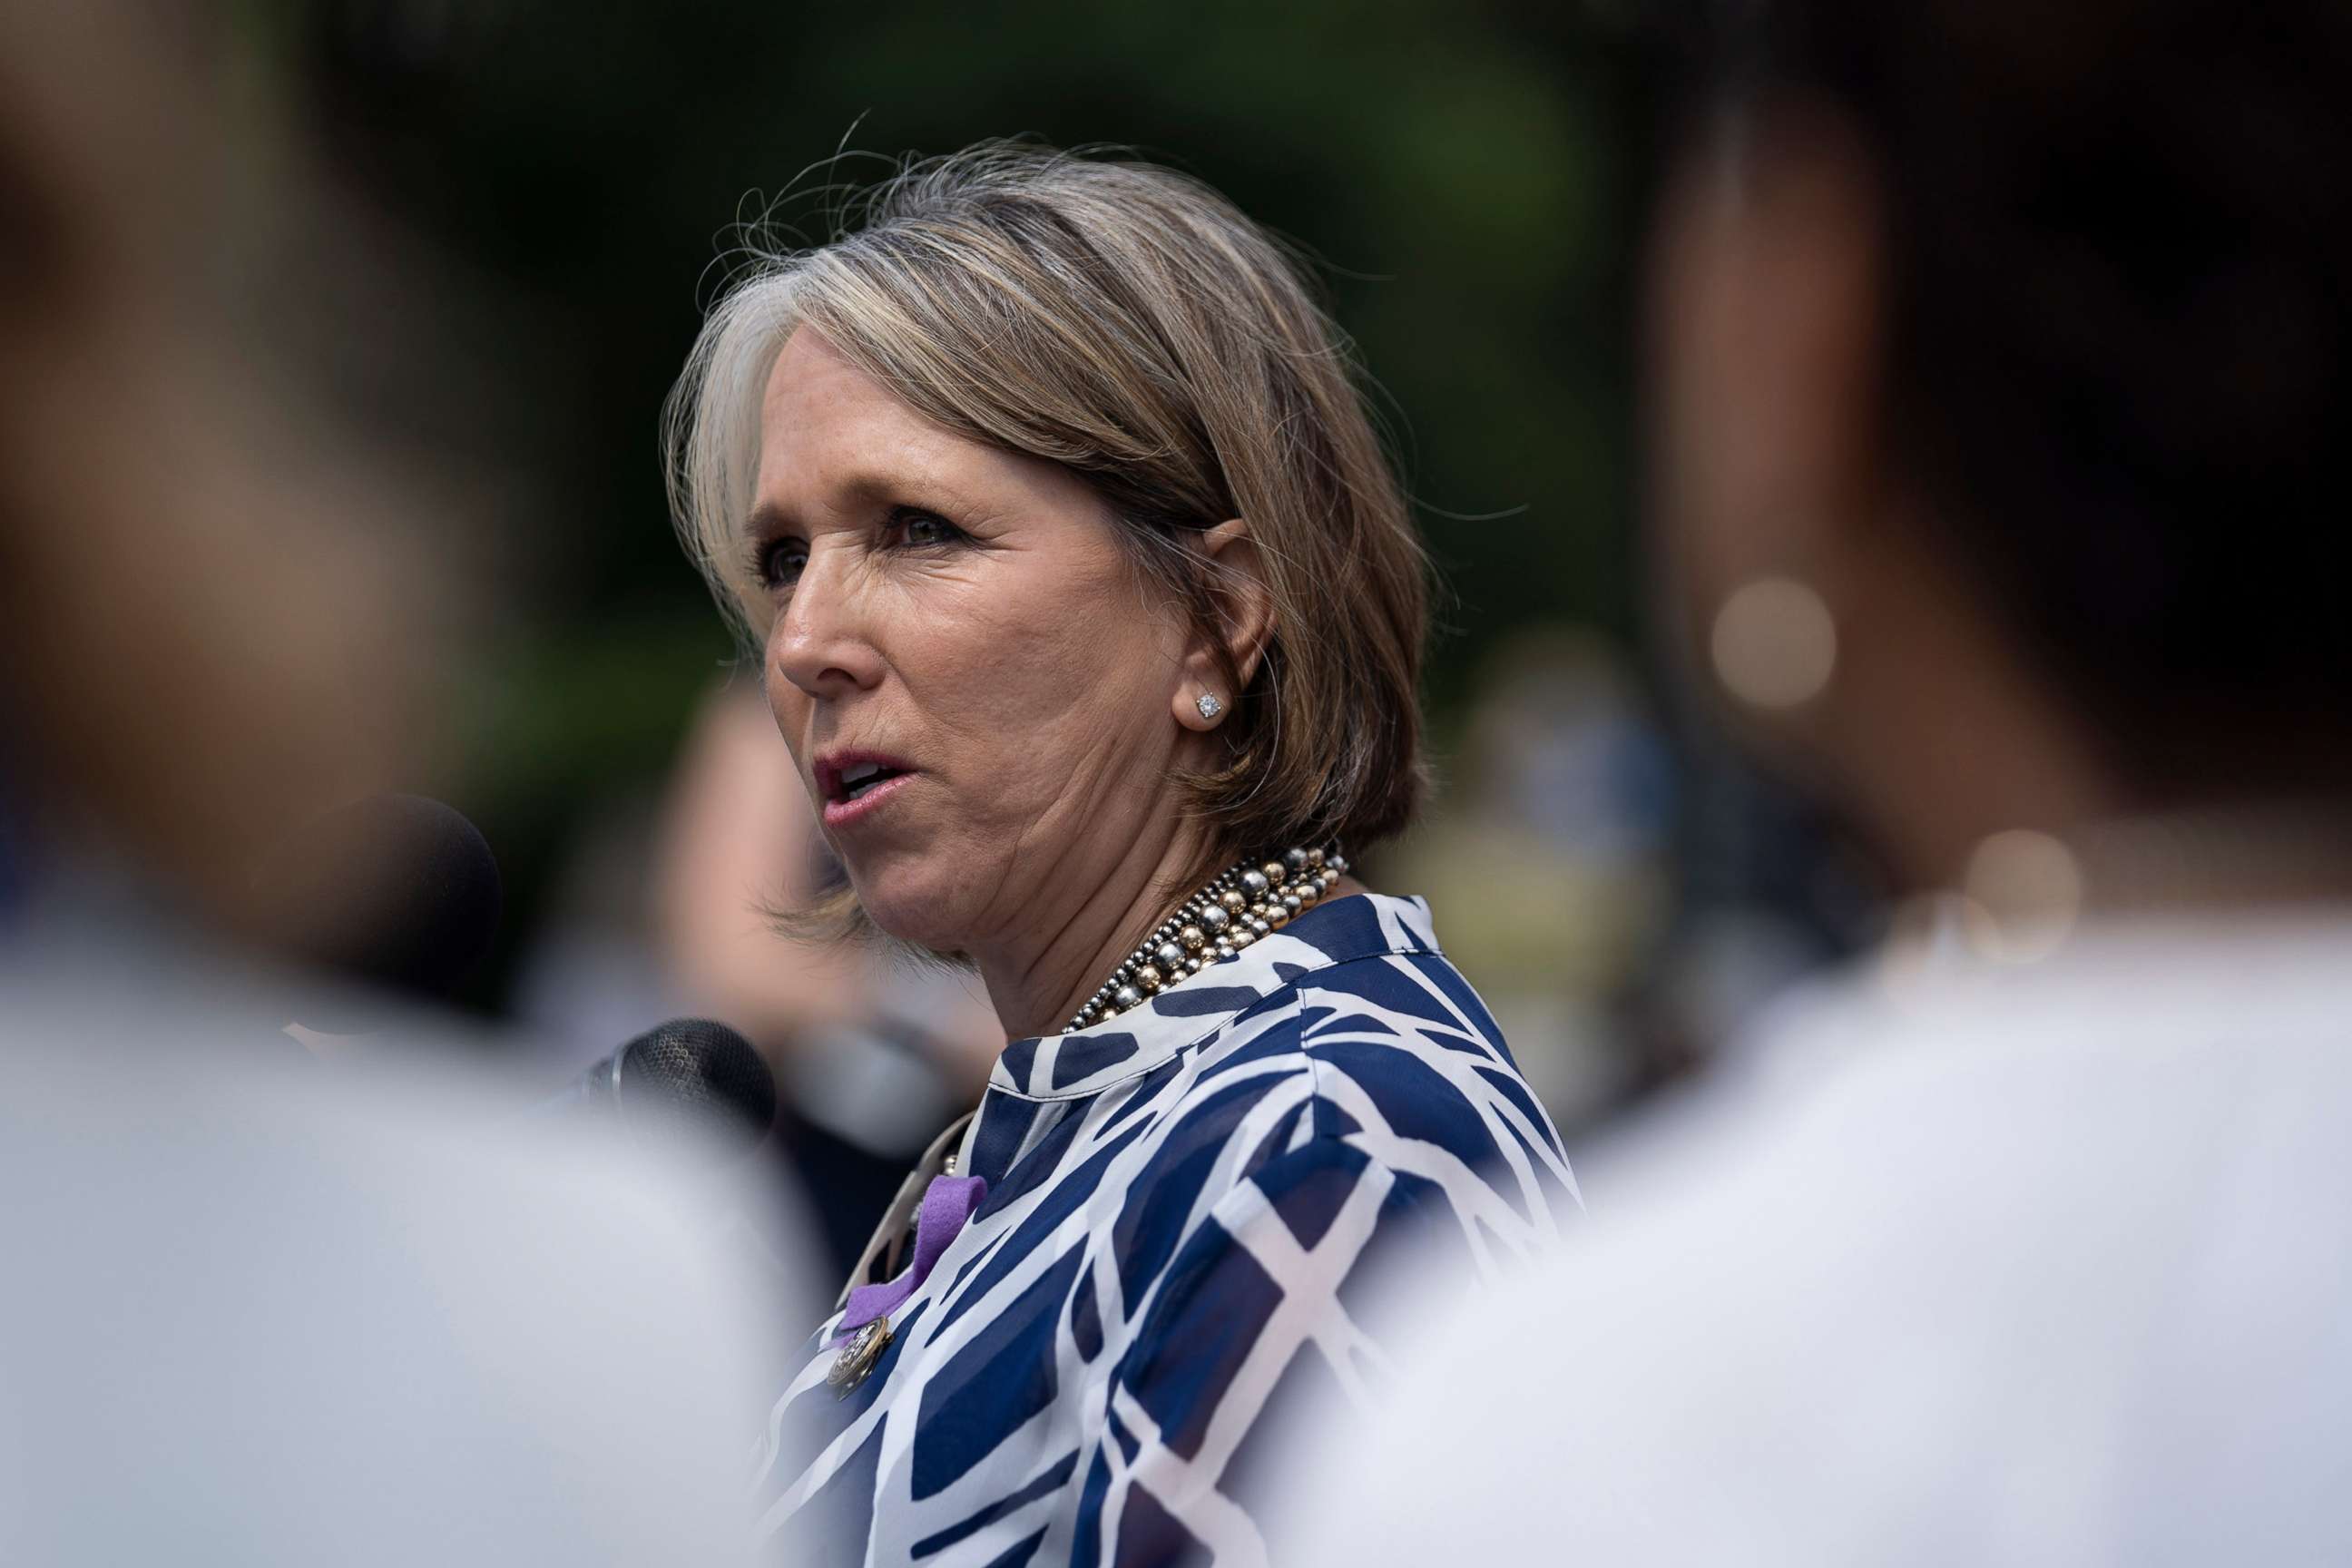 PHOTO: Rep. Michelle Lujan Grisham speaks during a news conference on immigration to condemn the Trump Administration's "zero tolerance" immigration policy, outside the US Capitol in Washington, June 13, 2018.